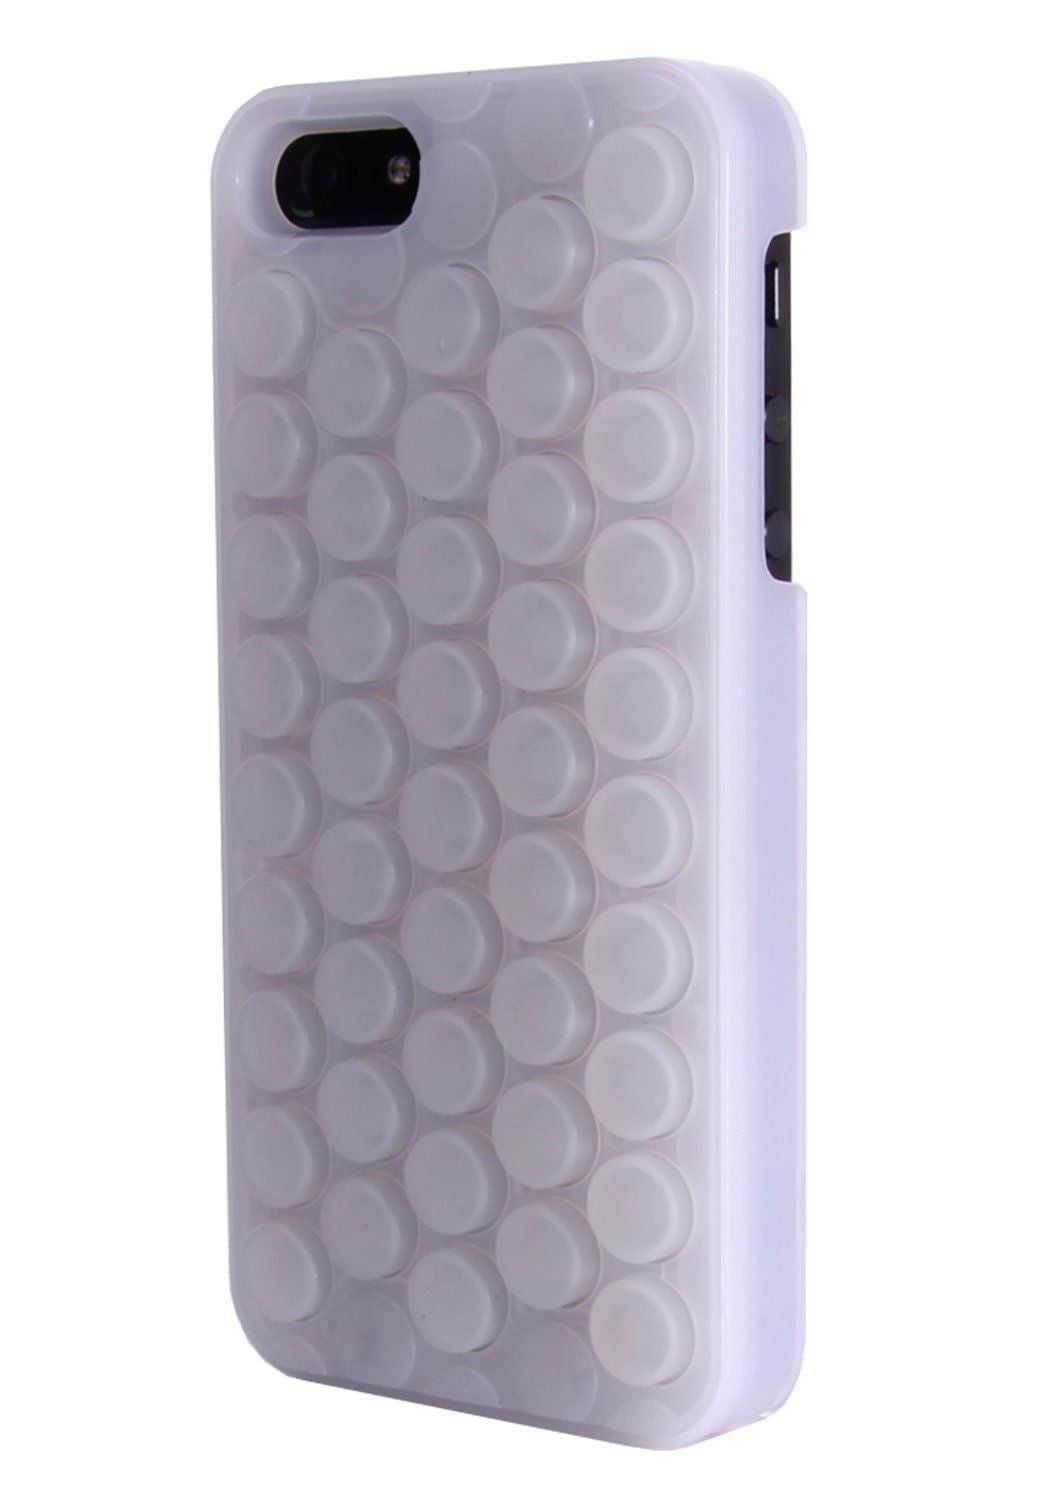 Everlasting Bubblewrap Case Cover For The iPhone 5S and 6